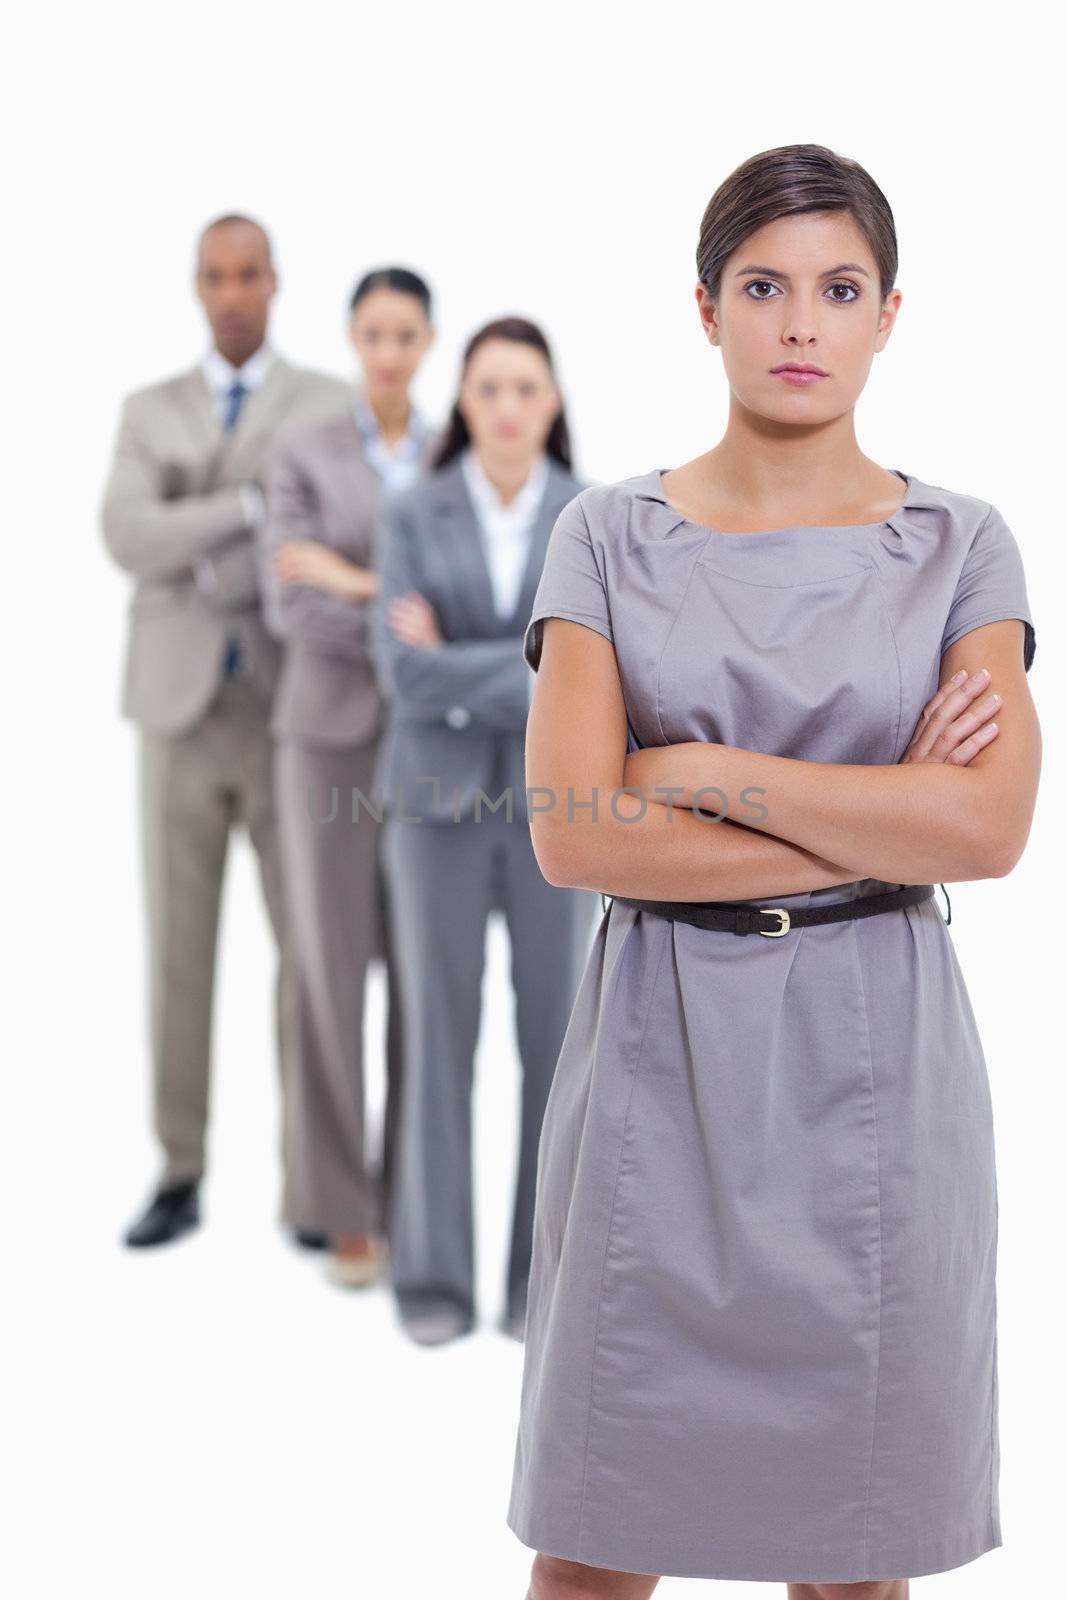 Serious business team crossing their arms and standing behind each other with focus on the foreground woman against white background 